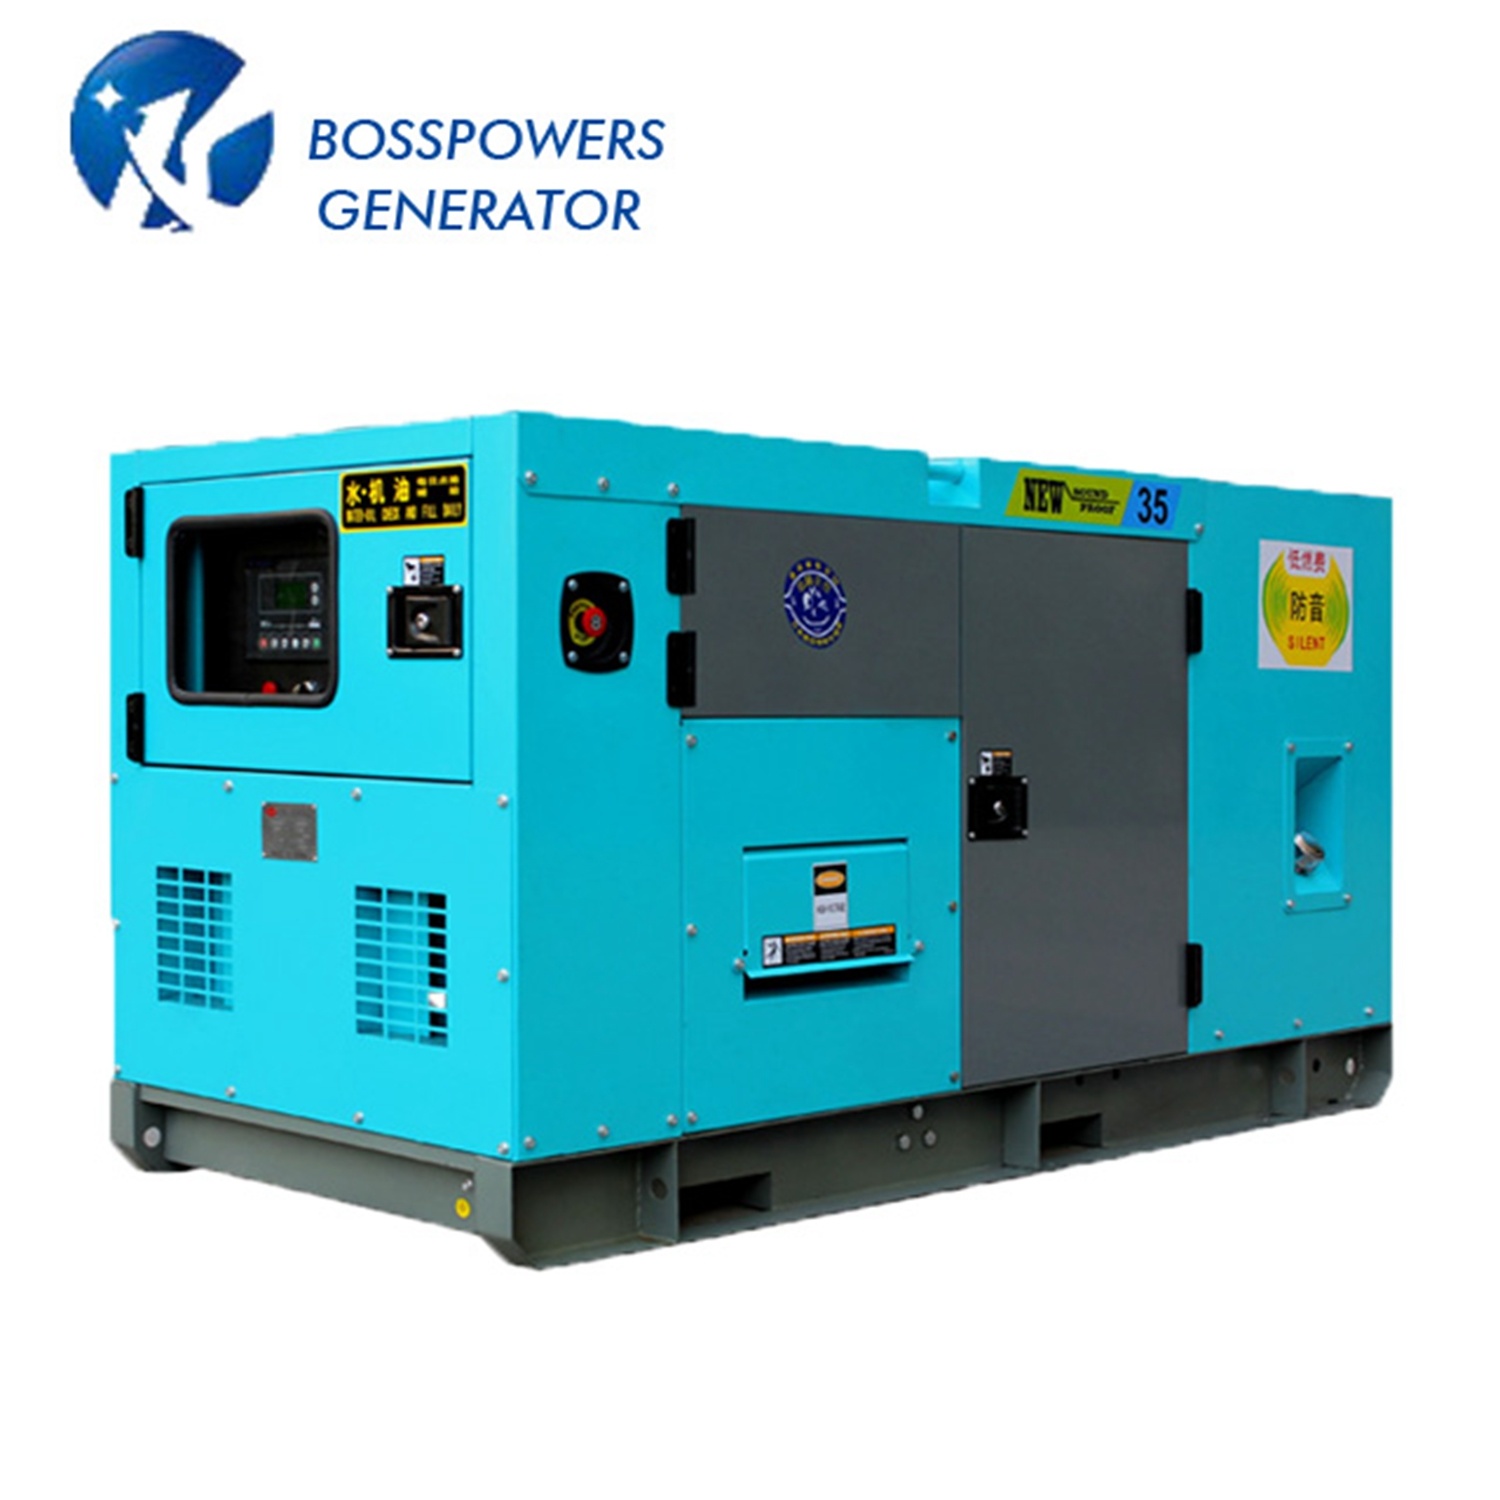 Industry Power 32kw Generator with Cummins Engine Low Noise